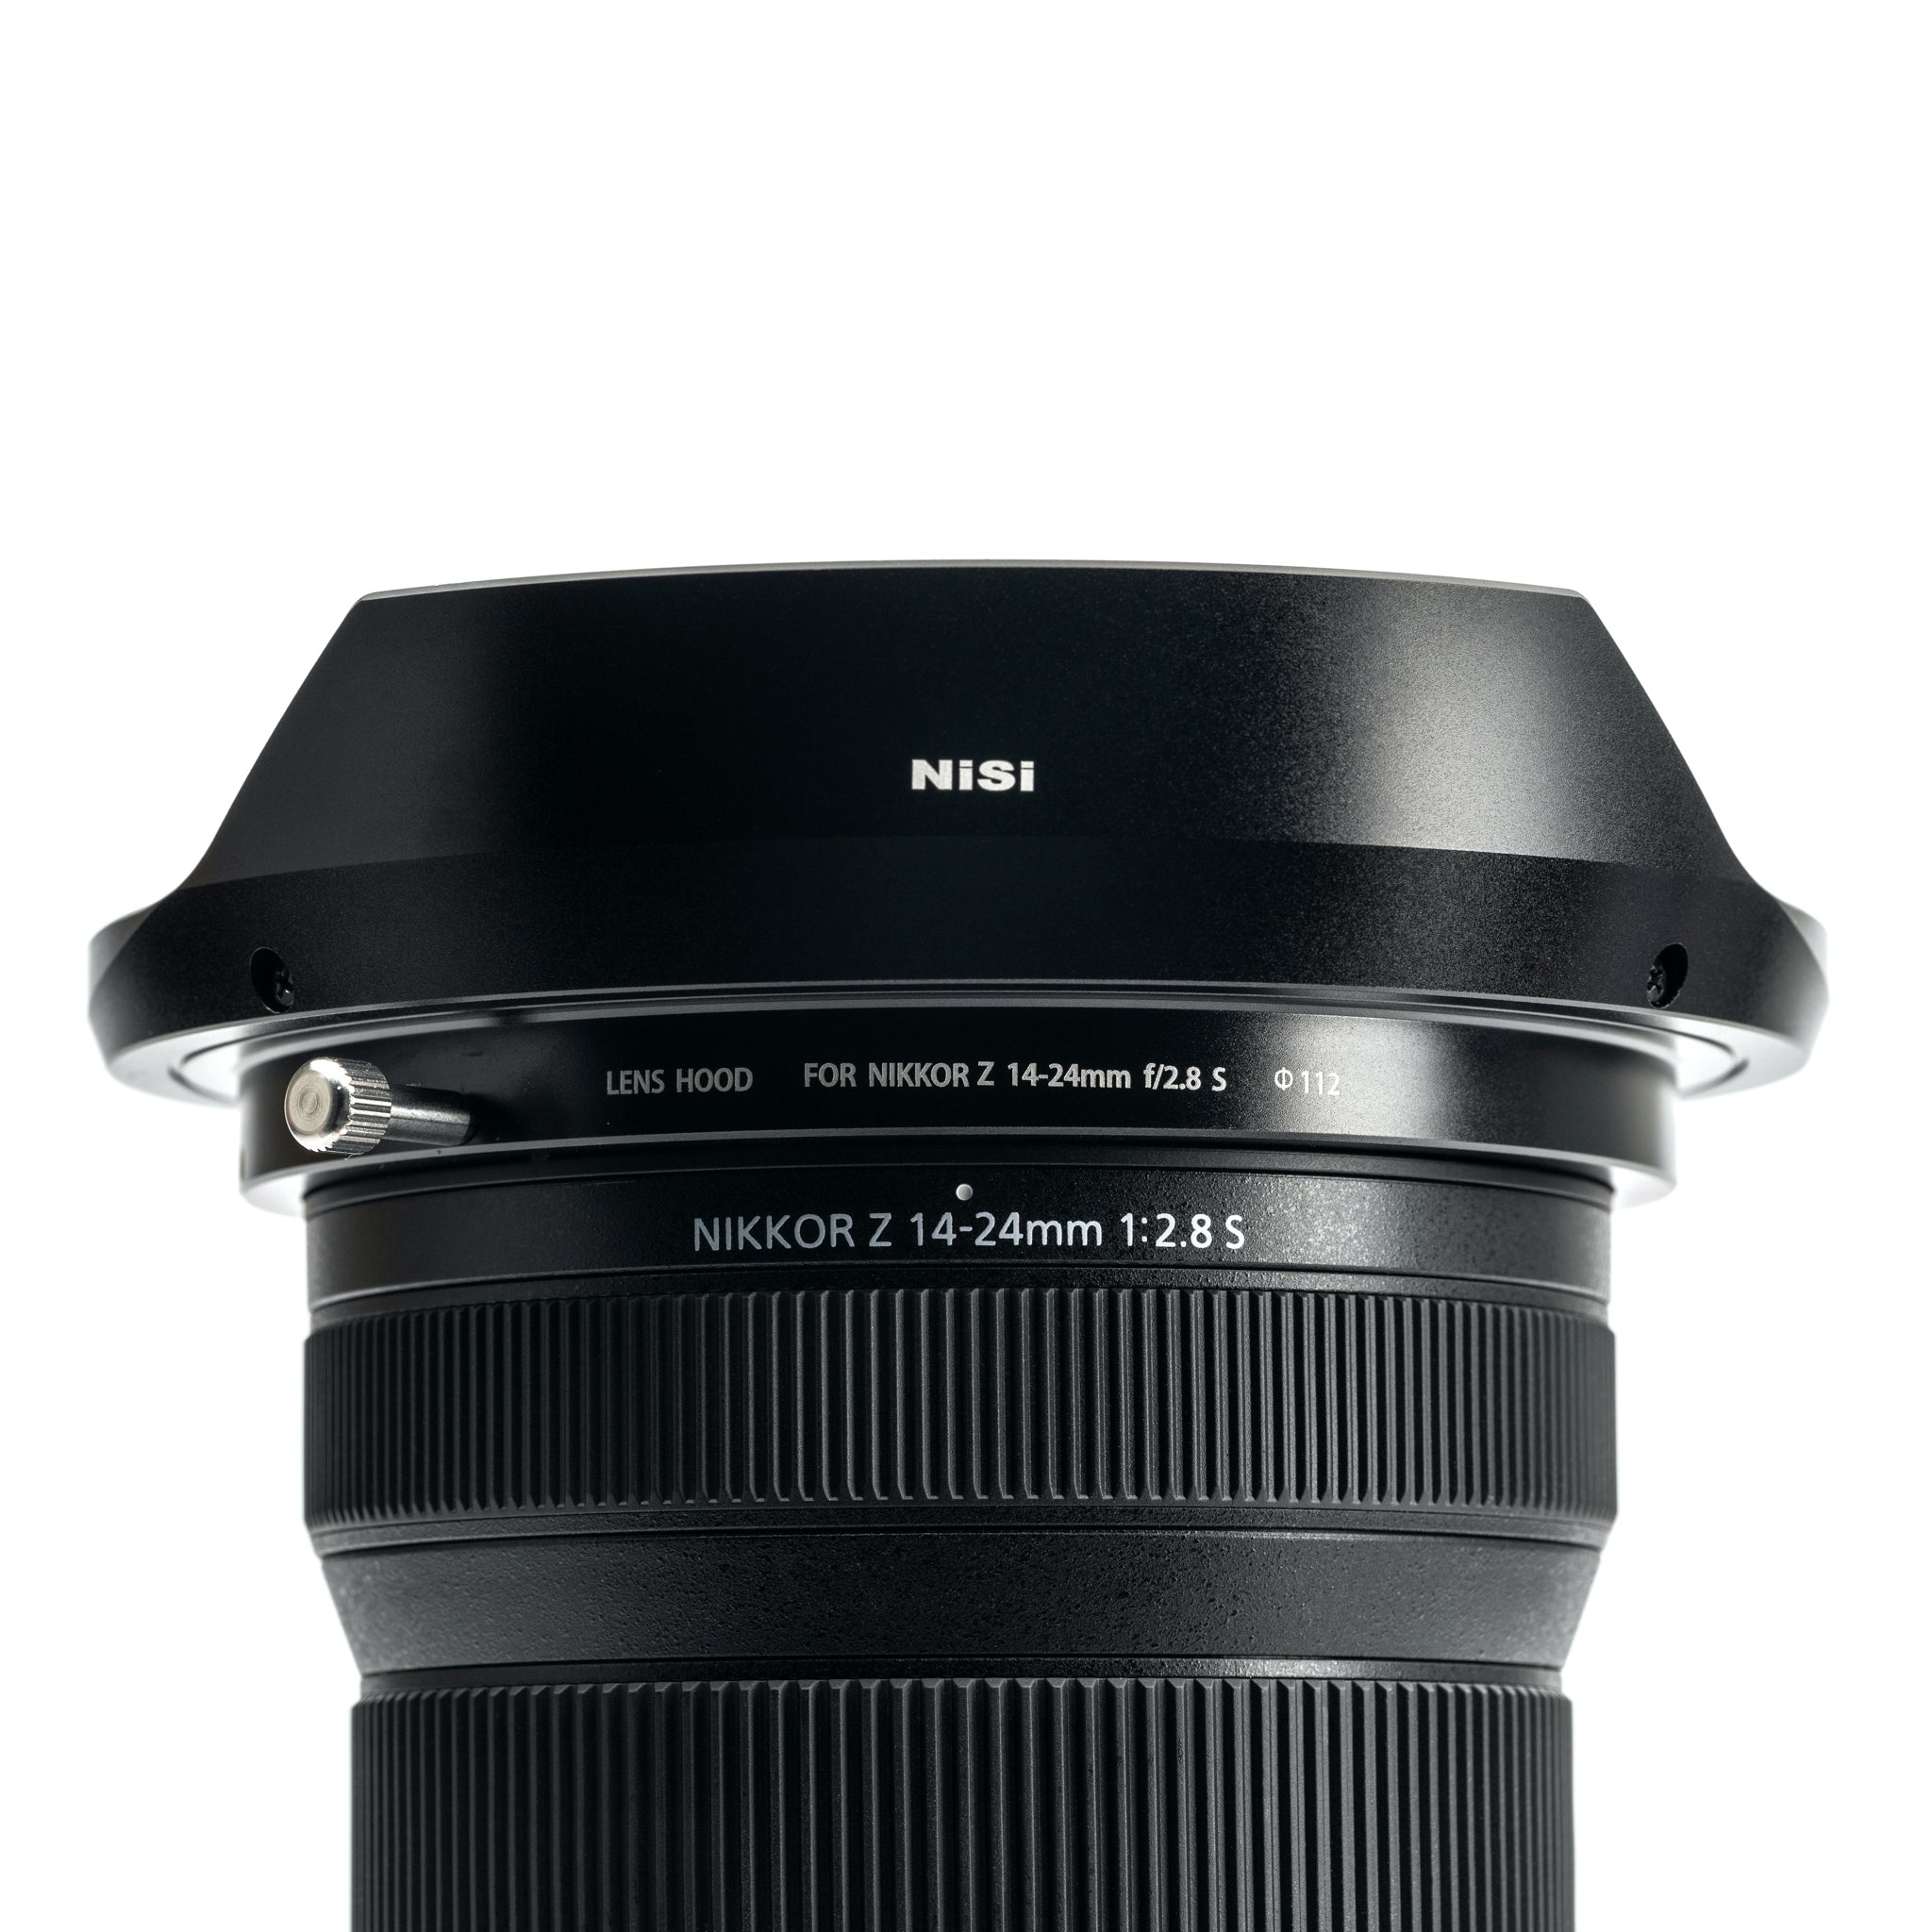 NIKKOR Z 14-24mm f/2.8 Sレンズフード